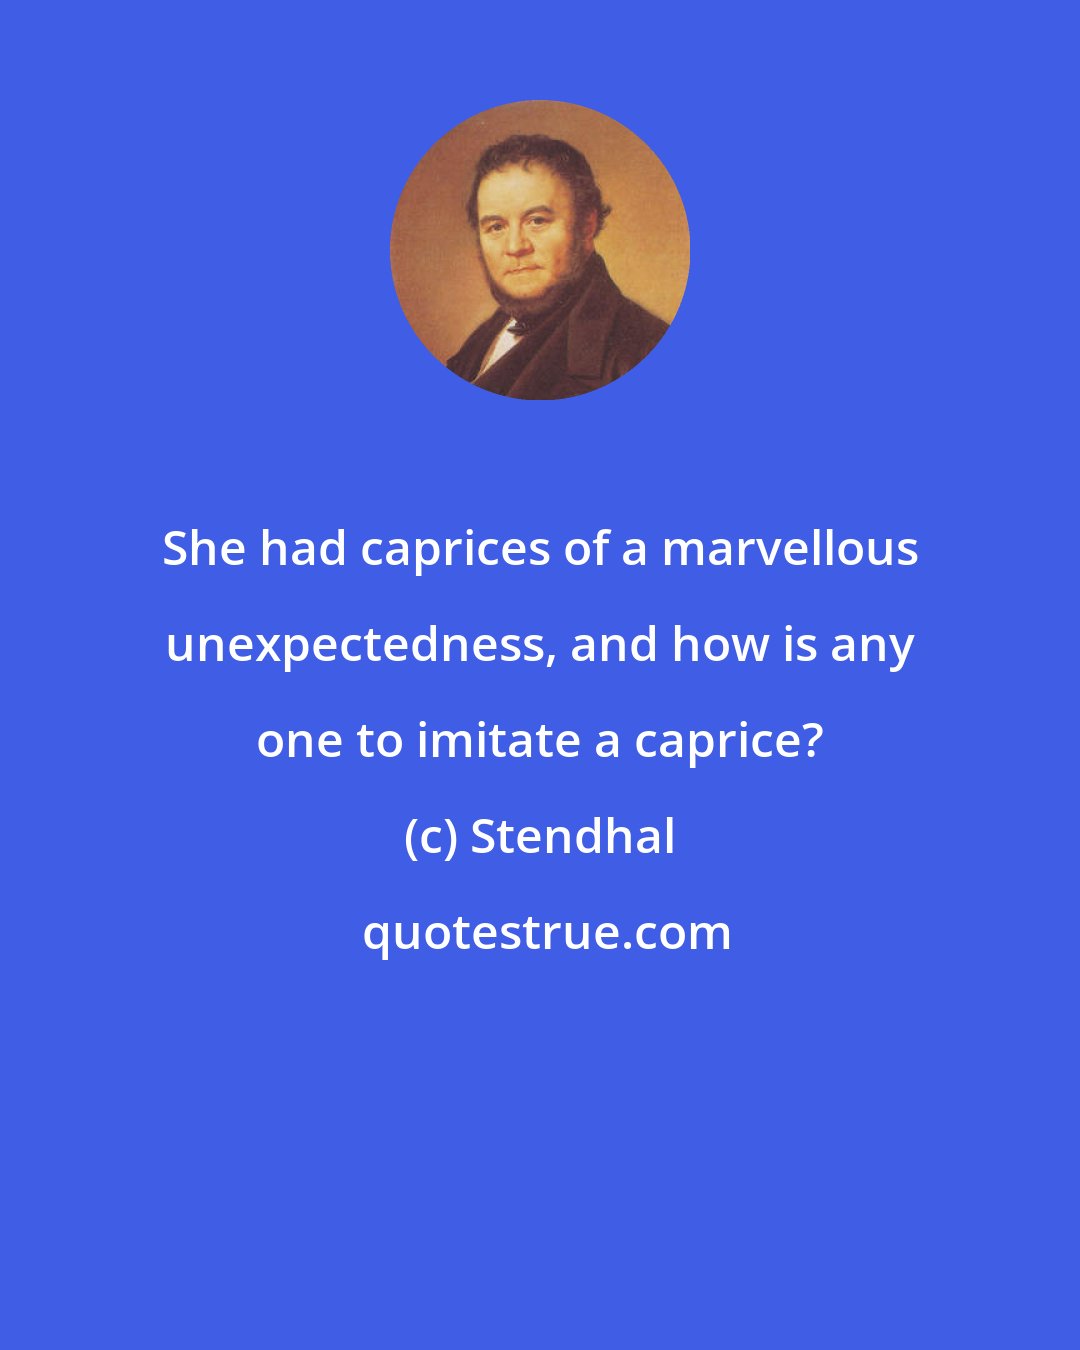 Stendhal: She had caprices of a marvellous unexpectedness, and how is any one to imitate a caprice?